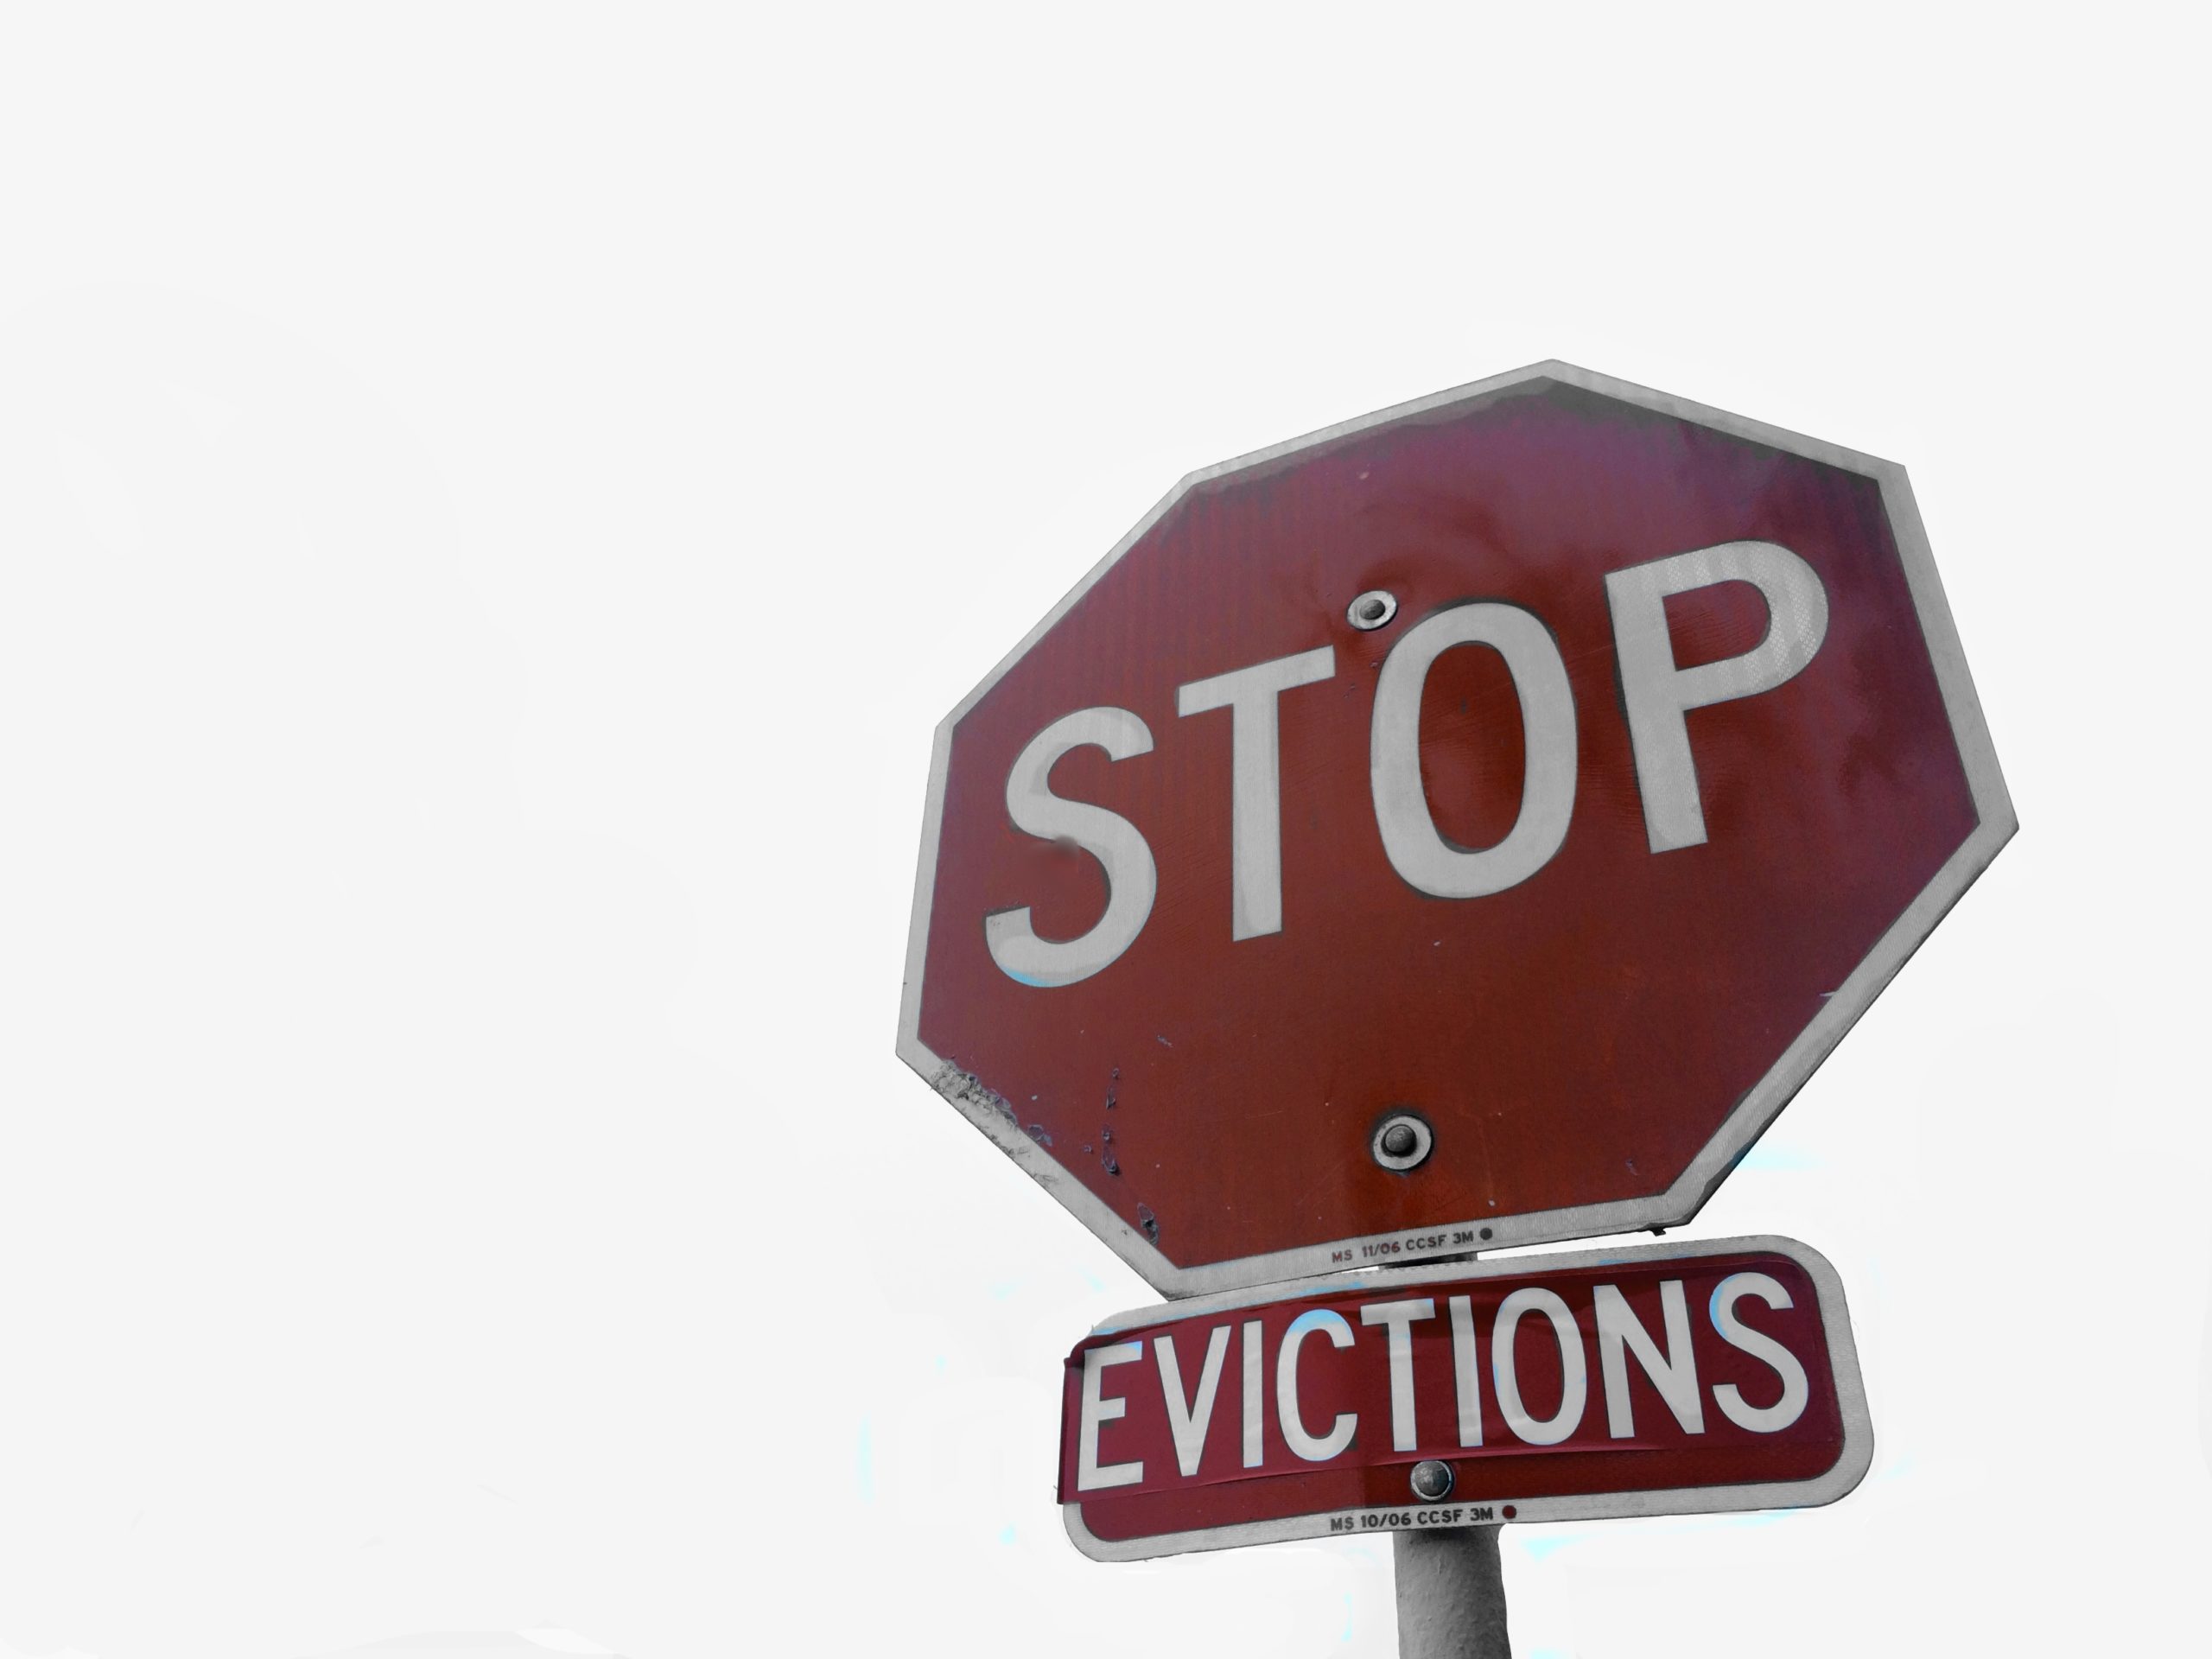 Eviction Moratoriums to protect renters in Cascadia are part of the region's coronavirus response. Photo: Lynn Friedman. Creative Commons use.